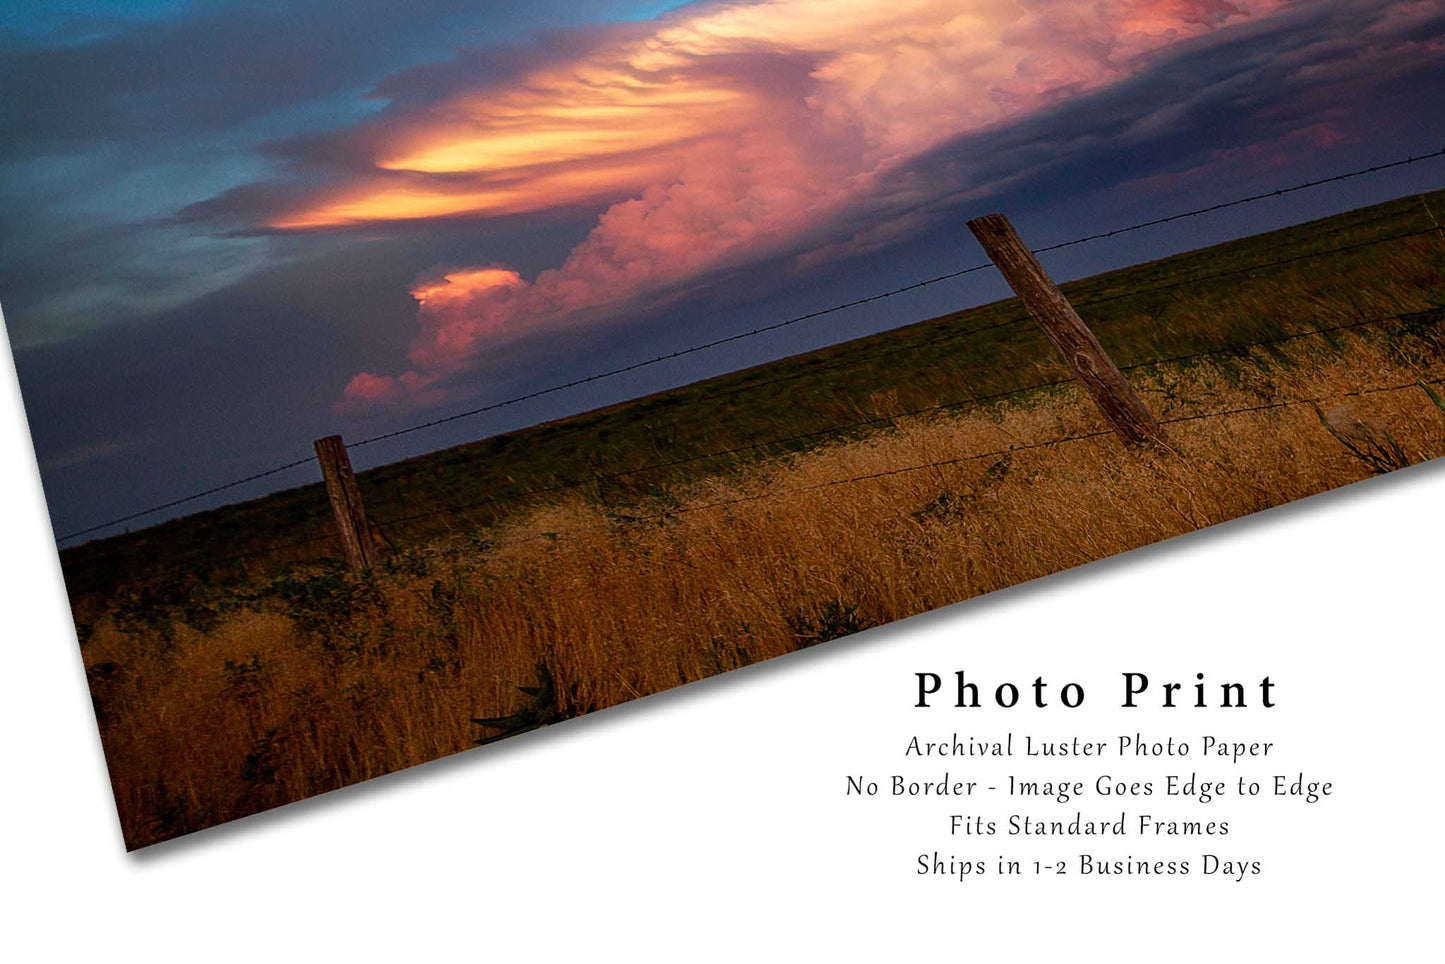 Cloud Photography Print - Wall Art Picture of Storm Cloud Illuminated by Evening Sunlight Over Western Oklahoma Plains Sky Decor 4x6 to 30x45